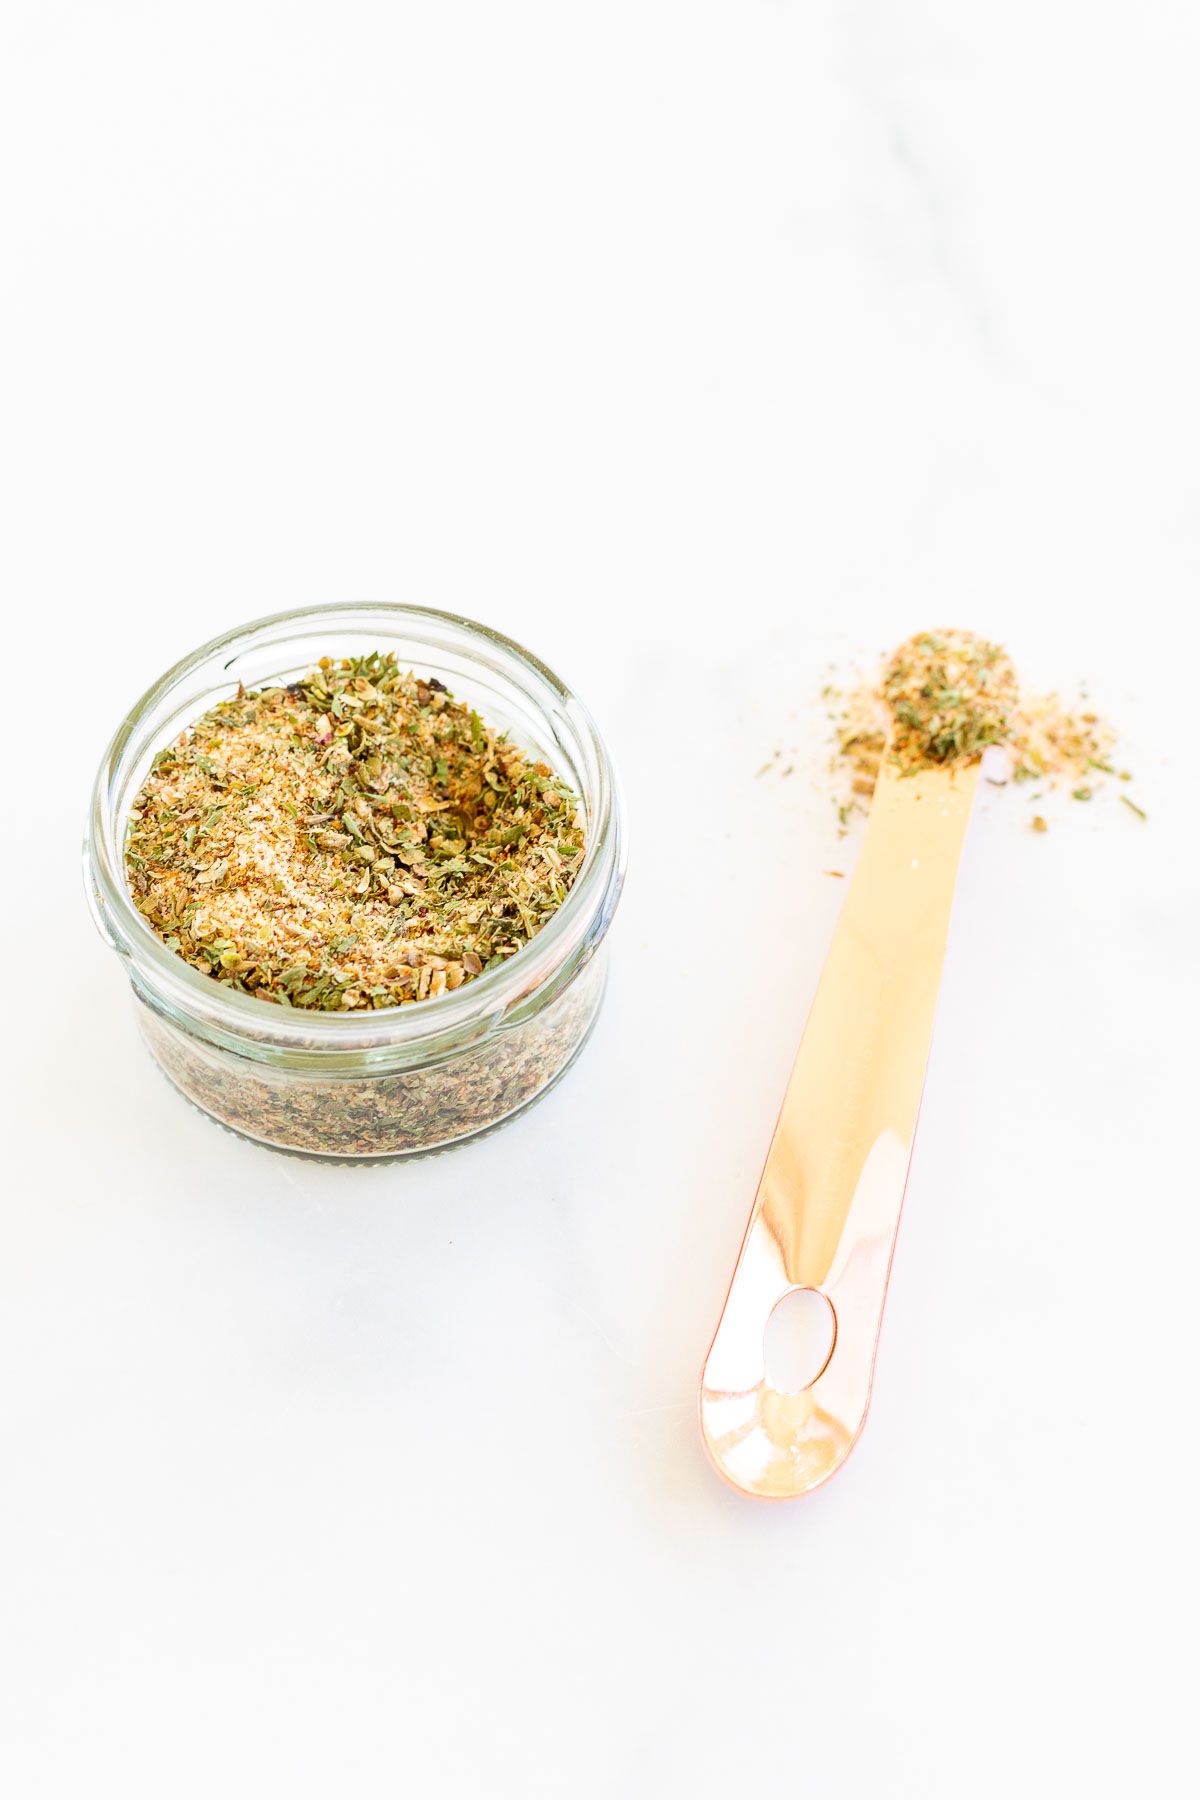 A small glass container filled with all purpose seasoning, teaspoon to the side.